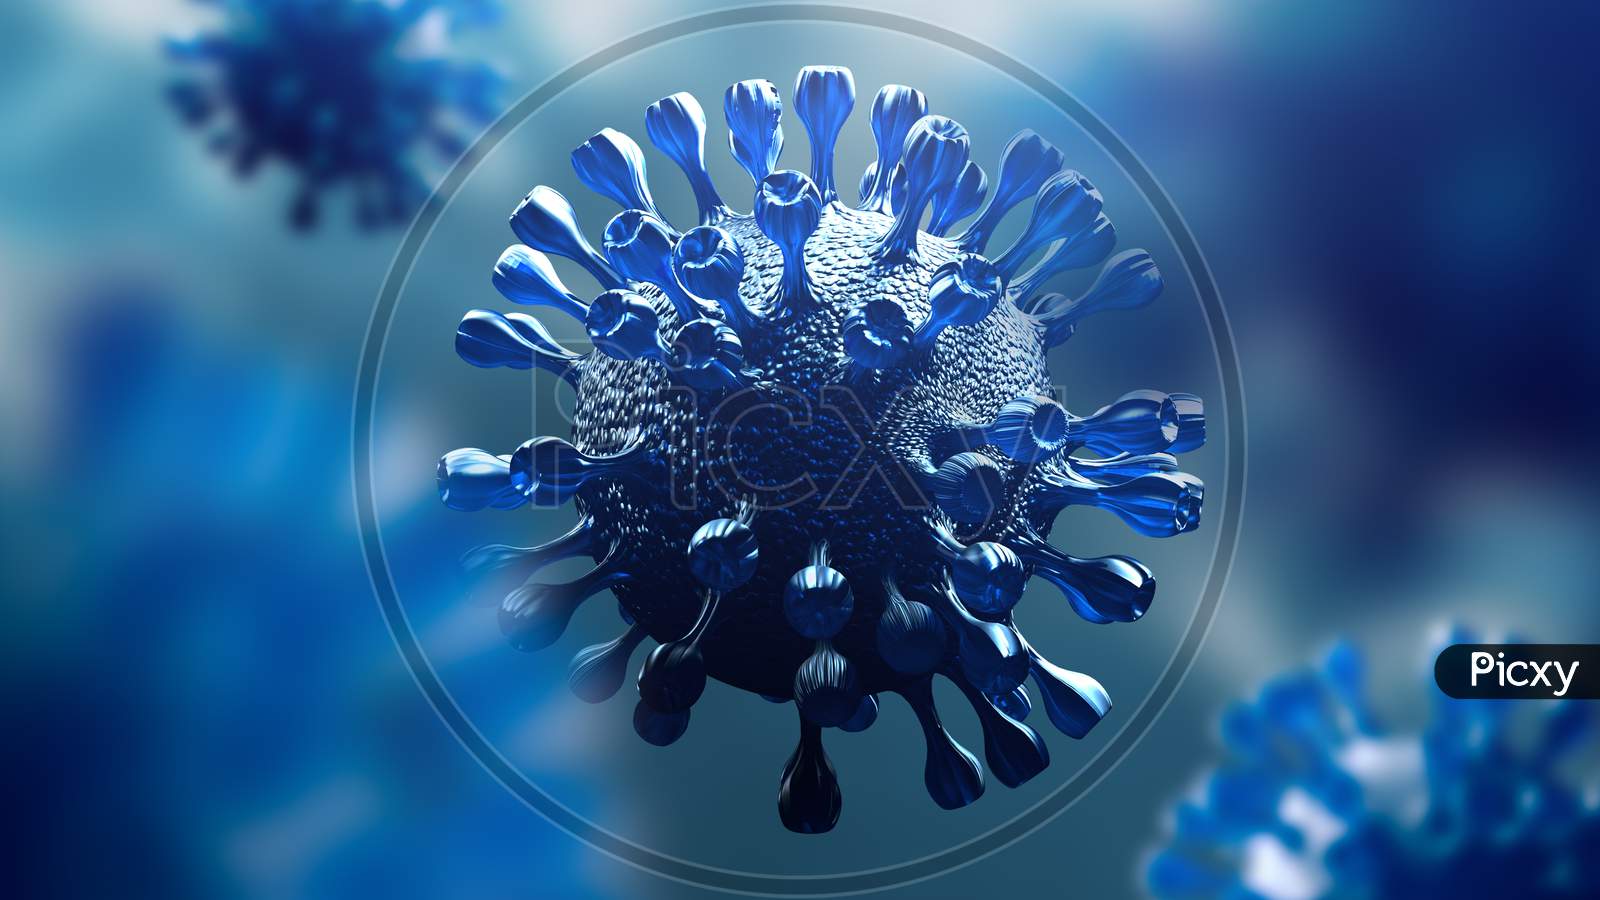 Super Closeup Coronavirus Covid-19 In Human Lung Body Background. Science Microbiology Concept. Blue Corona Virus Outbreak Epidemic. Medical Health Virology Infection Research. 3D Illustration